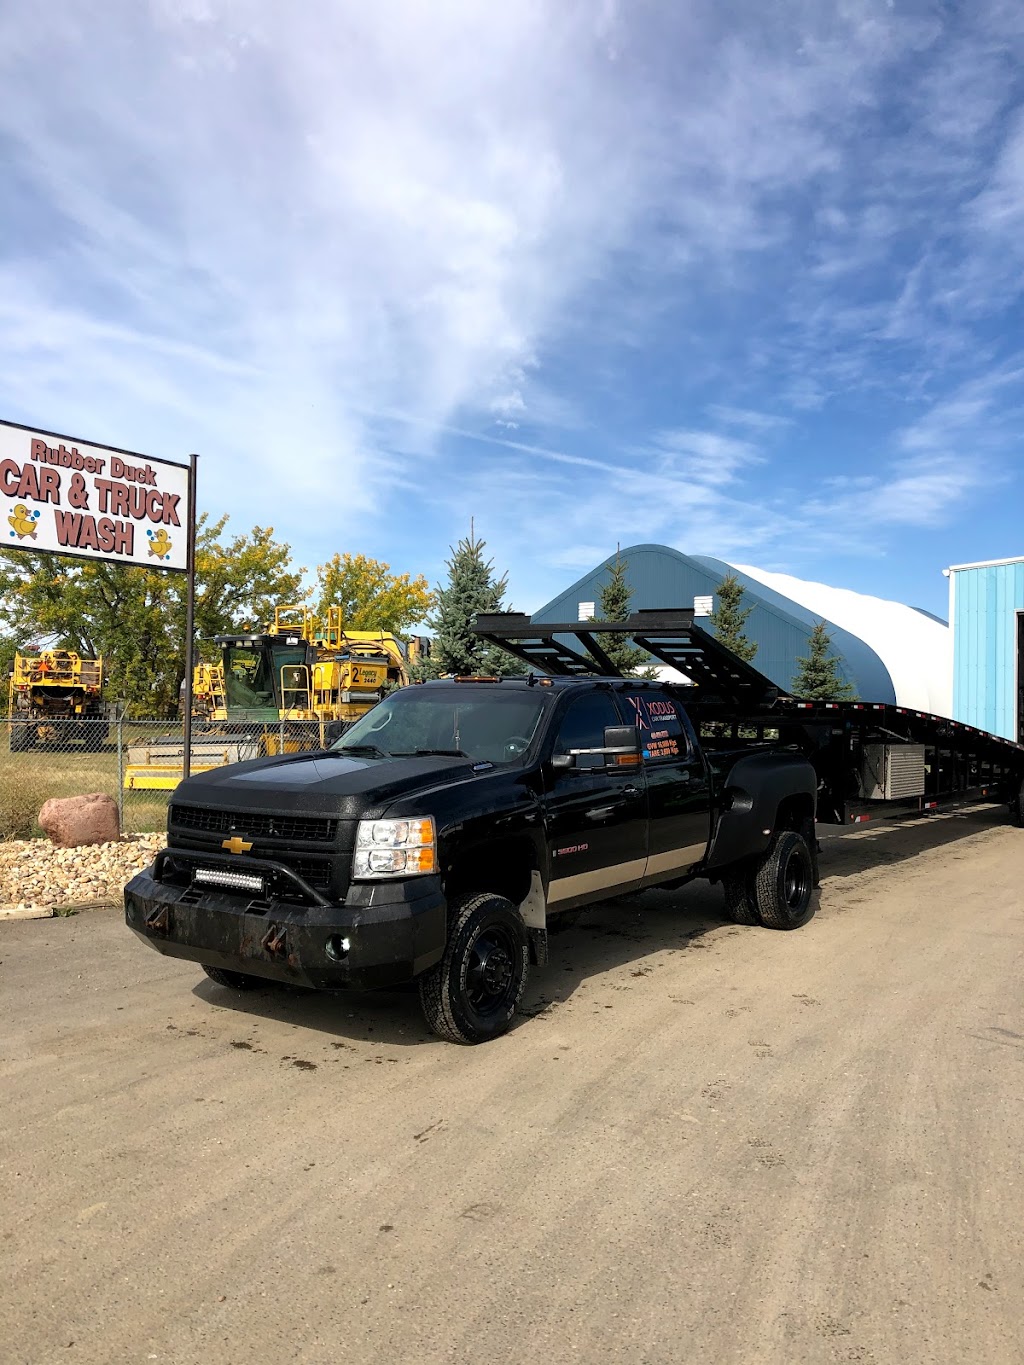 Rubber Duck Car & Truck Wash | 5906 52 Ave, Taber, AB T1G 1W8, Canada | Phone: (403) 223-3752